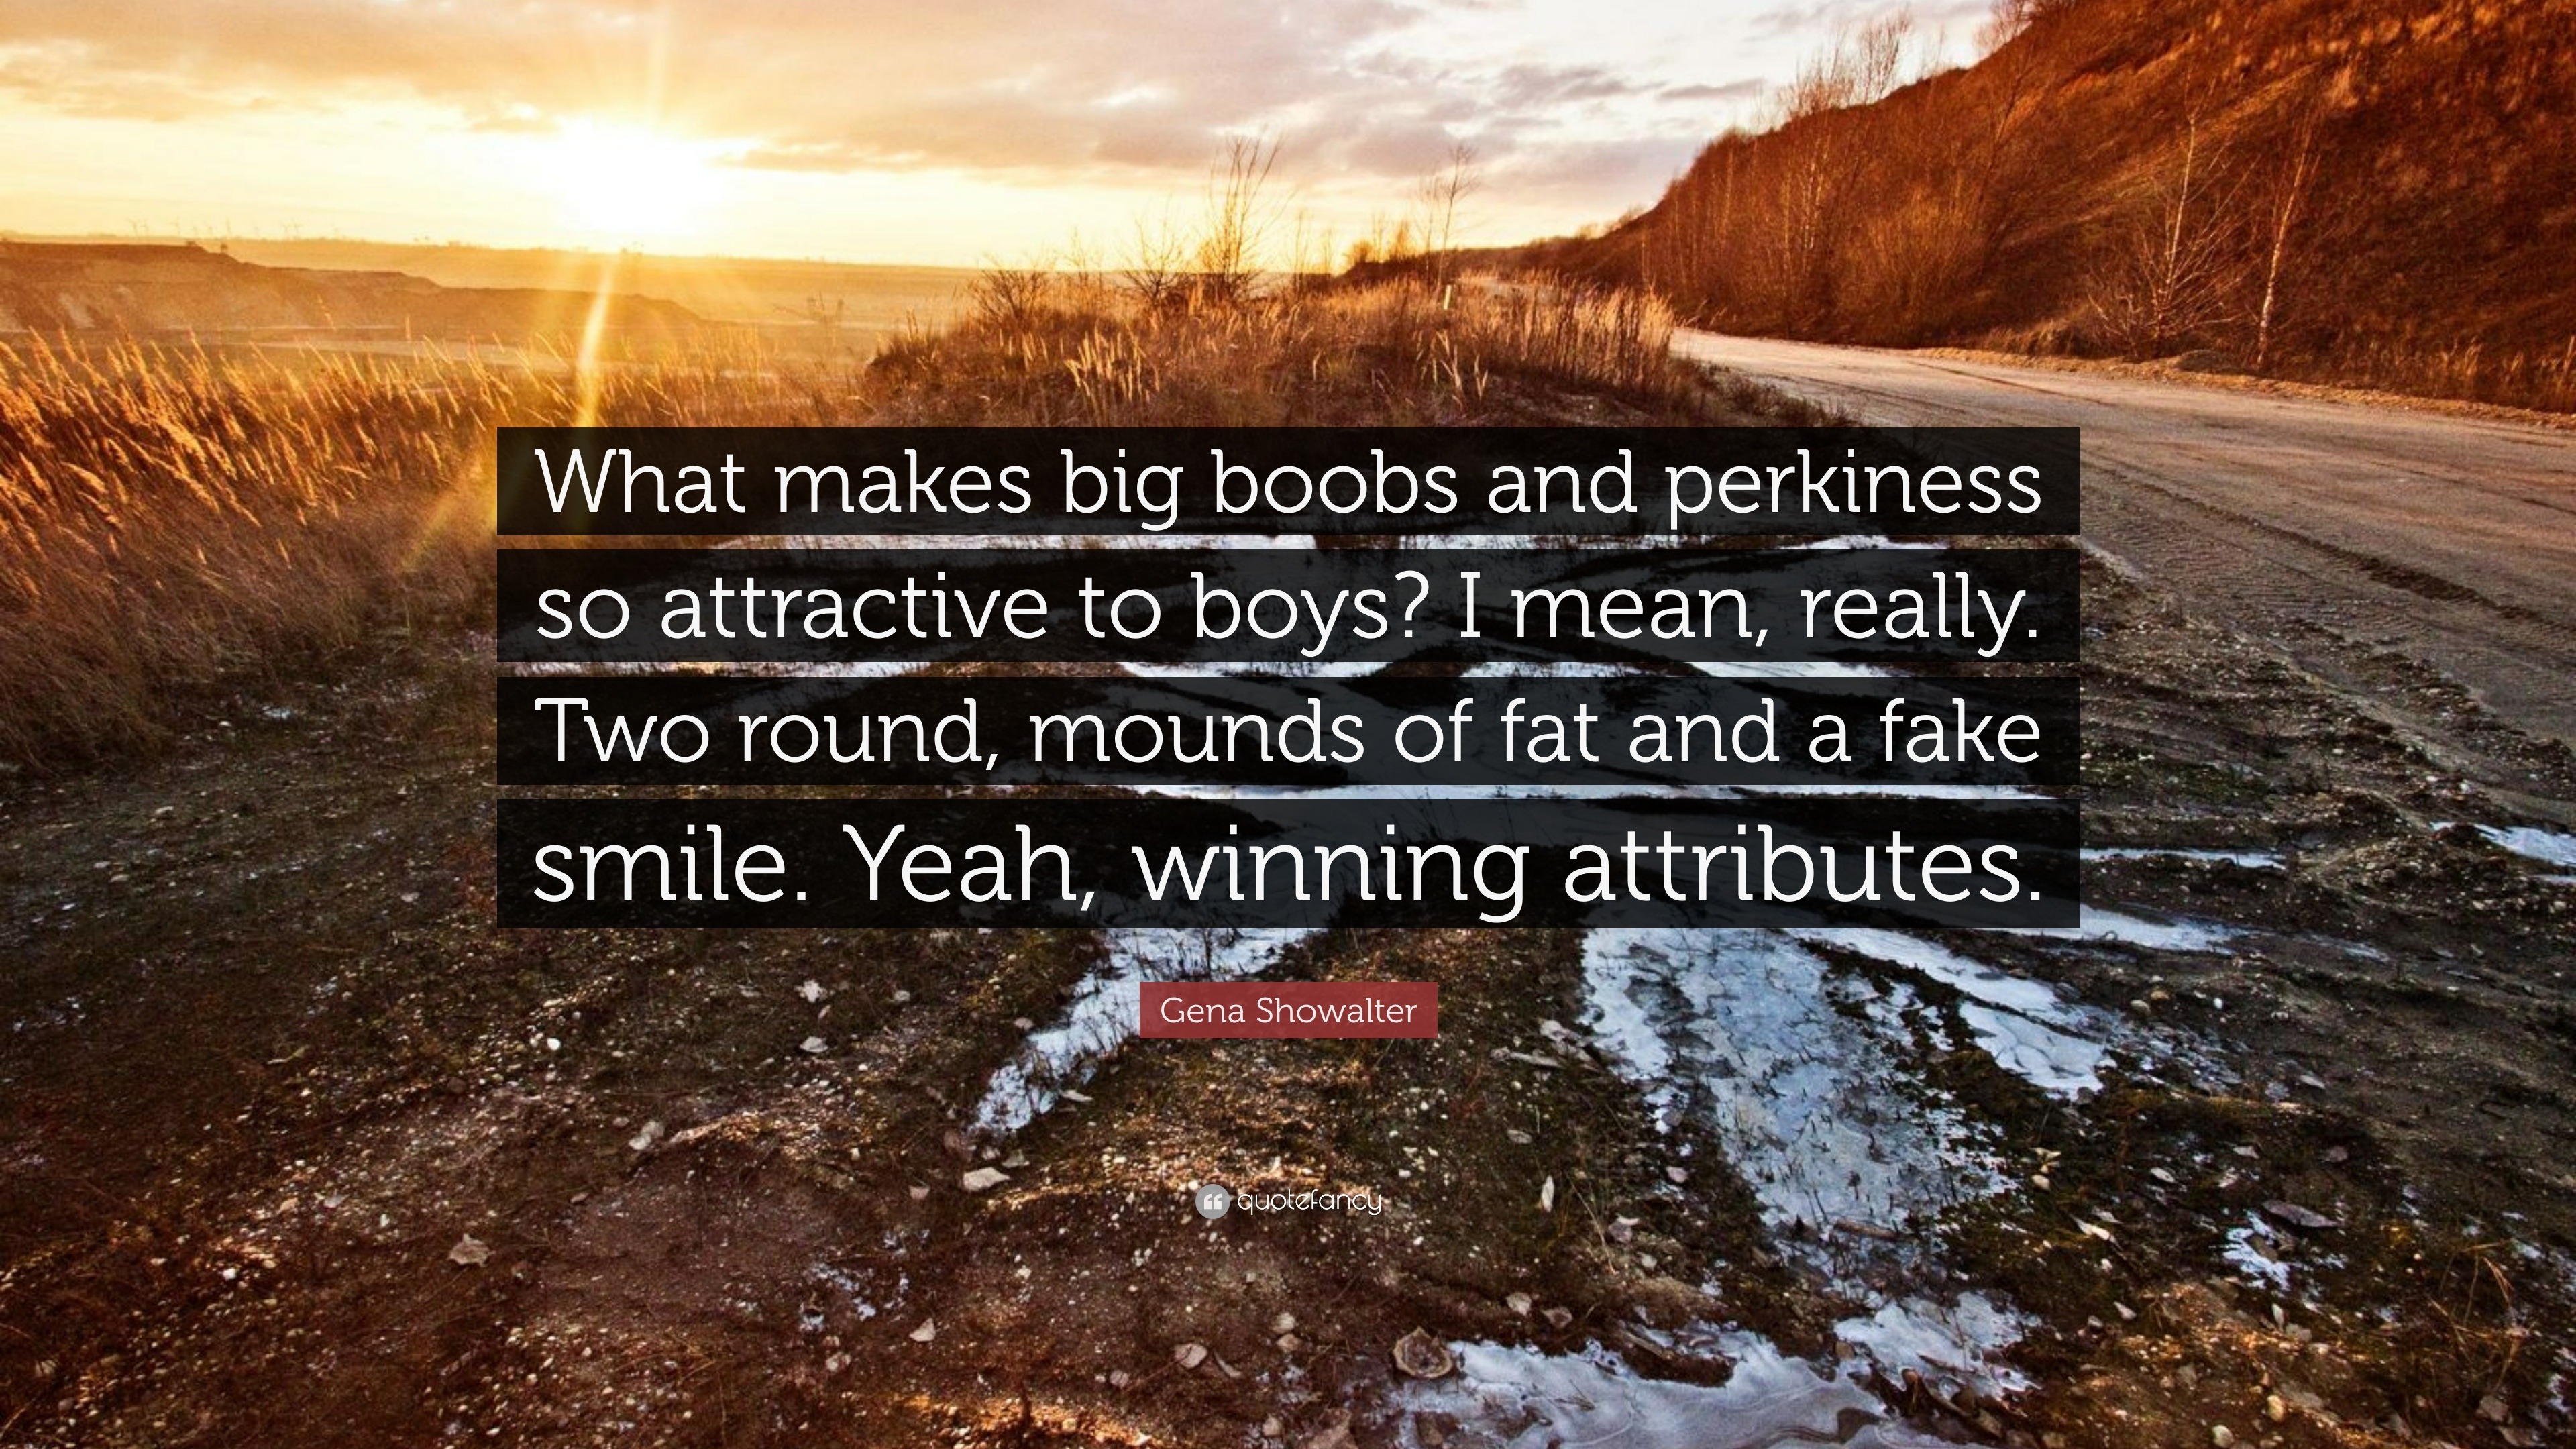 Gena Showalter Quote What Makes Big Boobs And Perkiness So Images, Photos, Reviews